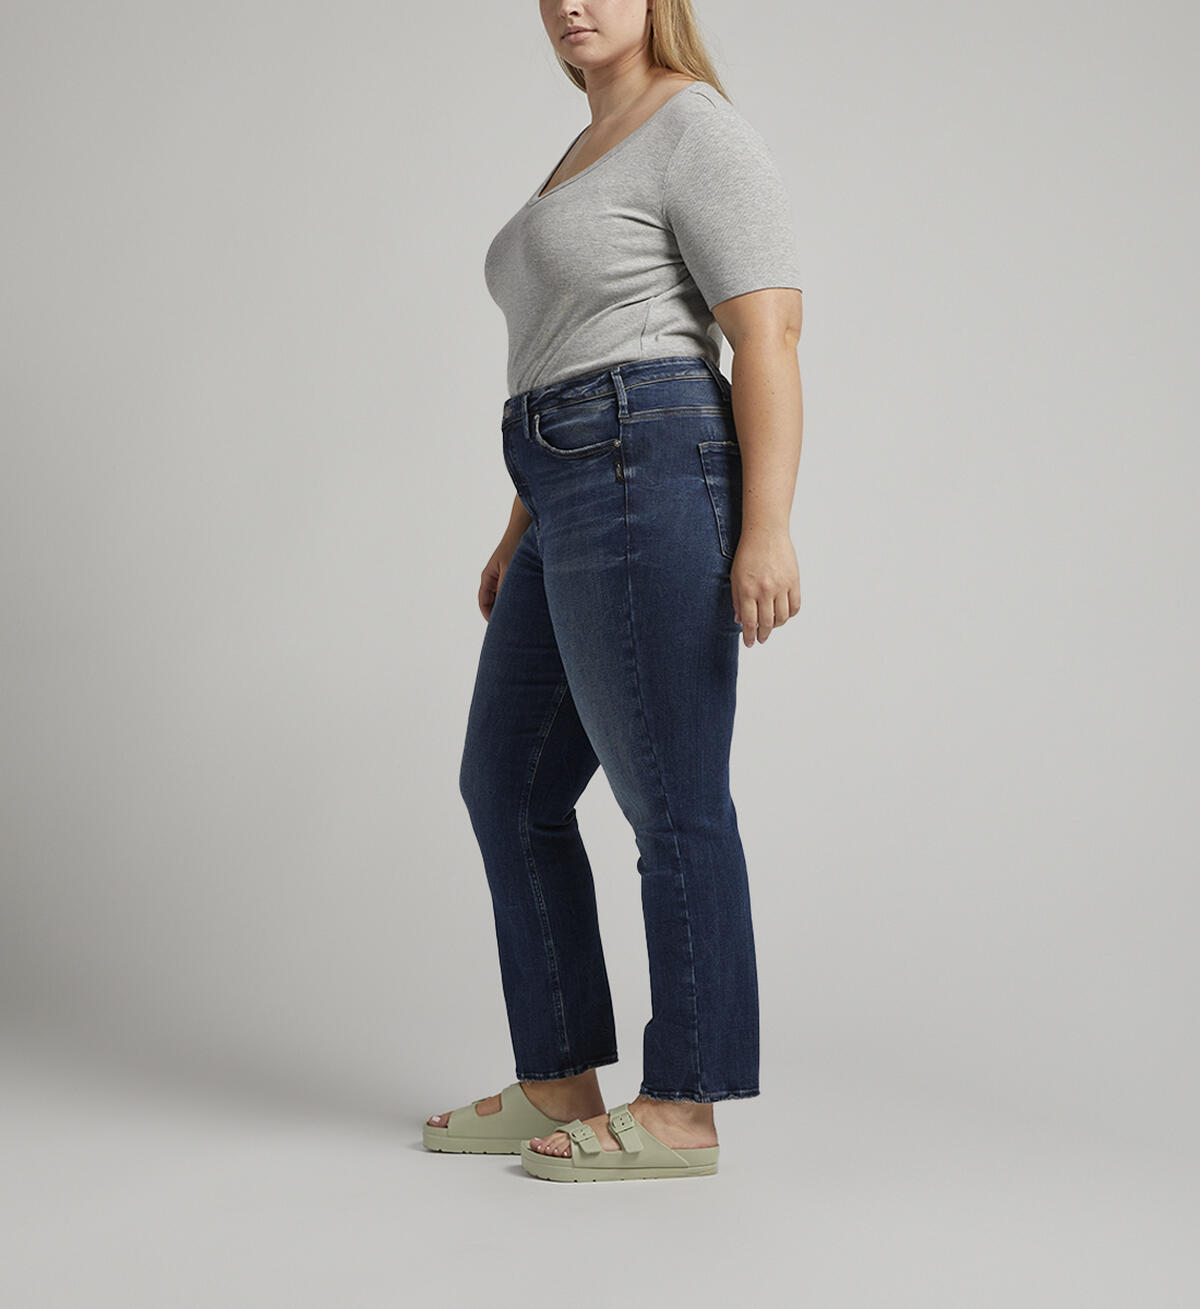 Infinite Fit High Rise Straight Leg Jeans Plus Size, , hi-res image number 2